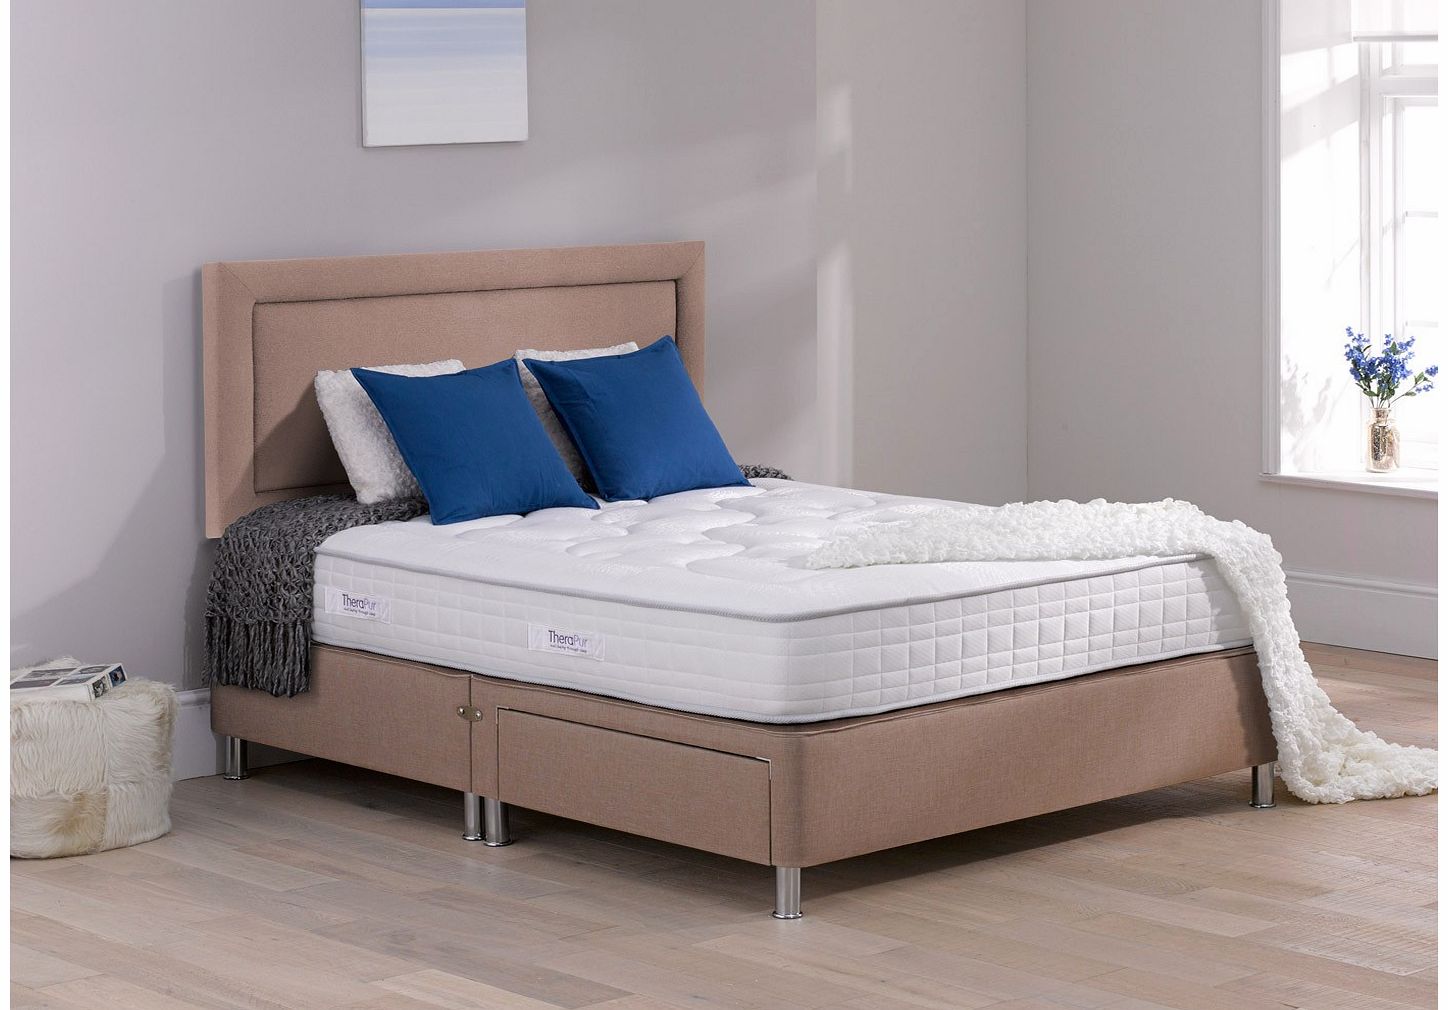 Therapur Tranquility Divan Bed With Legs -